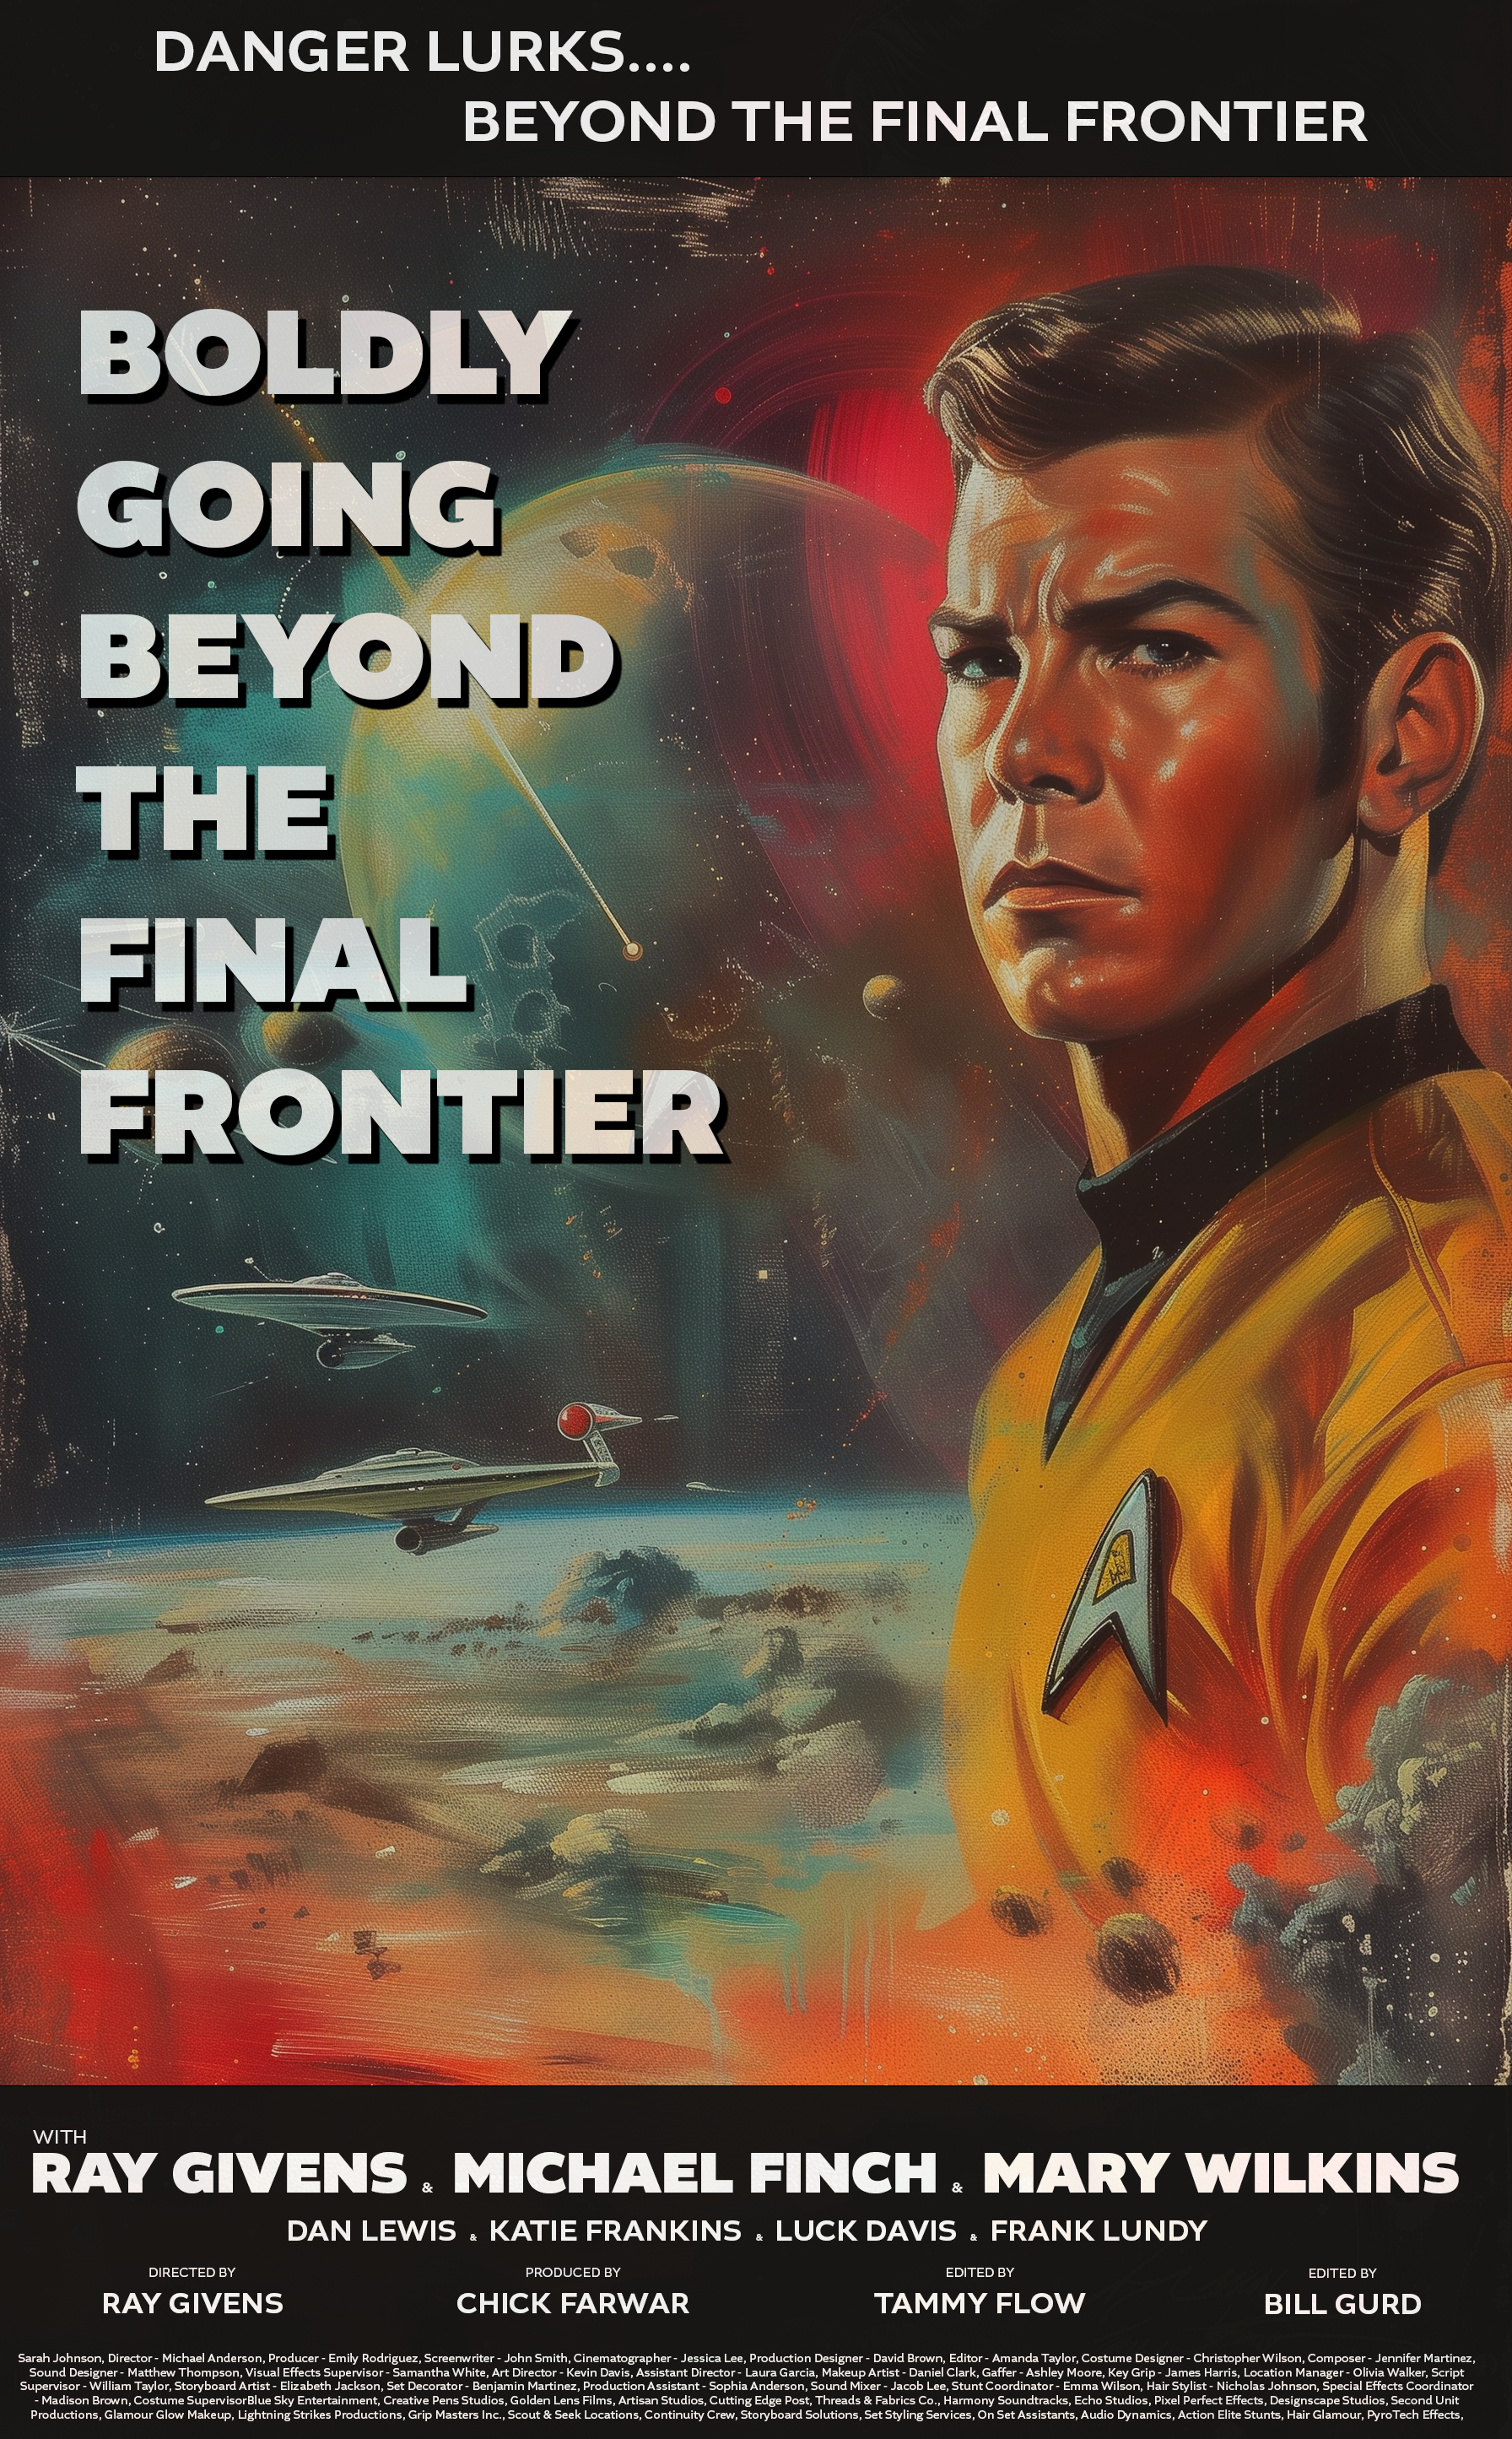 Name:  Beyond the Final Frontier.png
Views: 137
Size:  8.19 MB